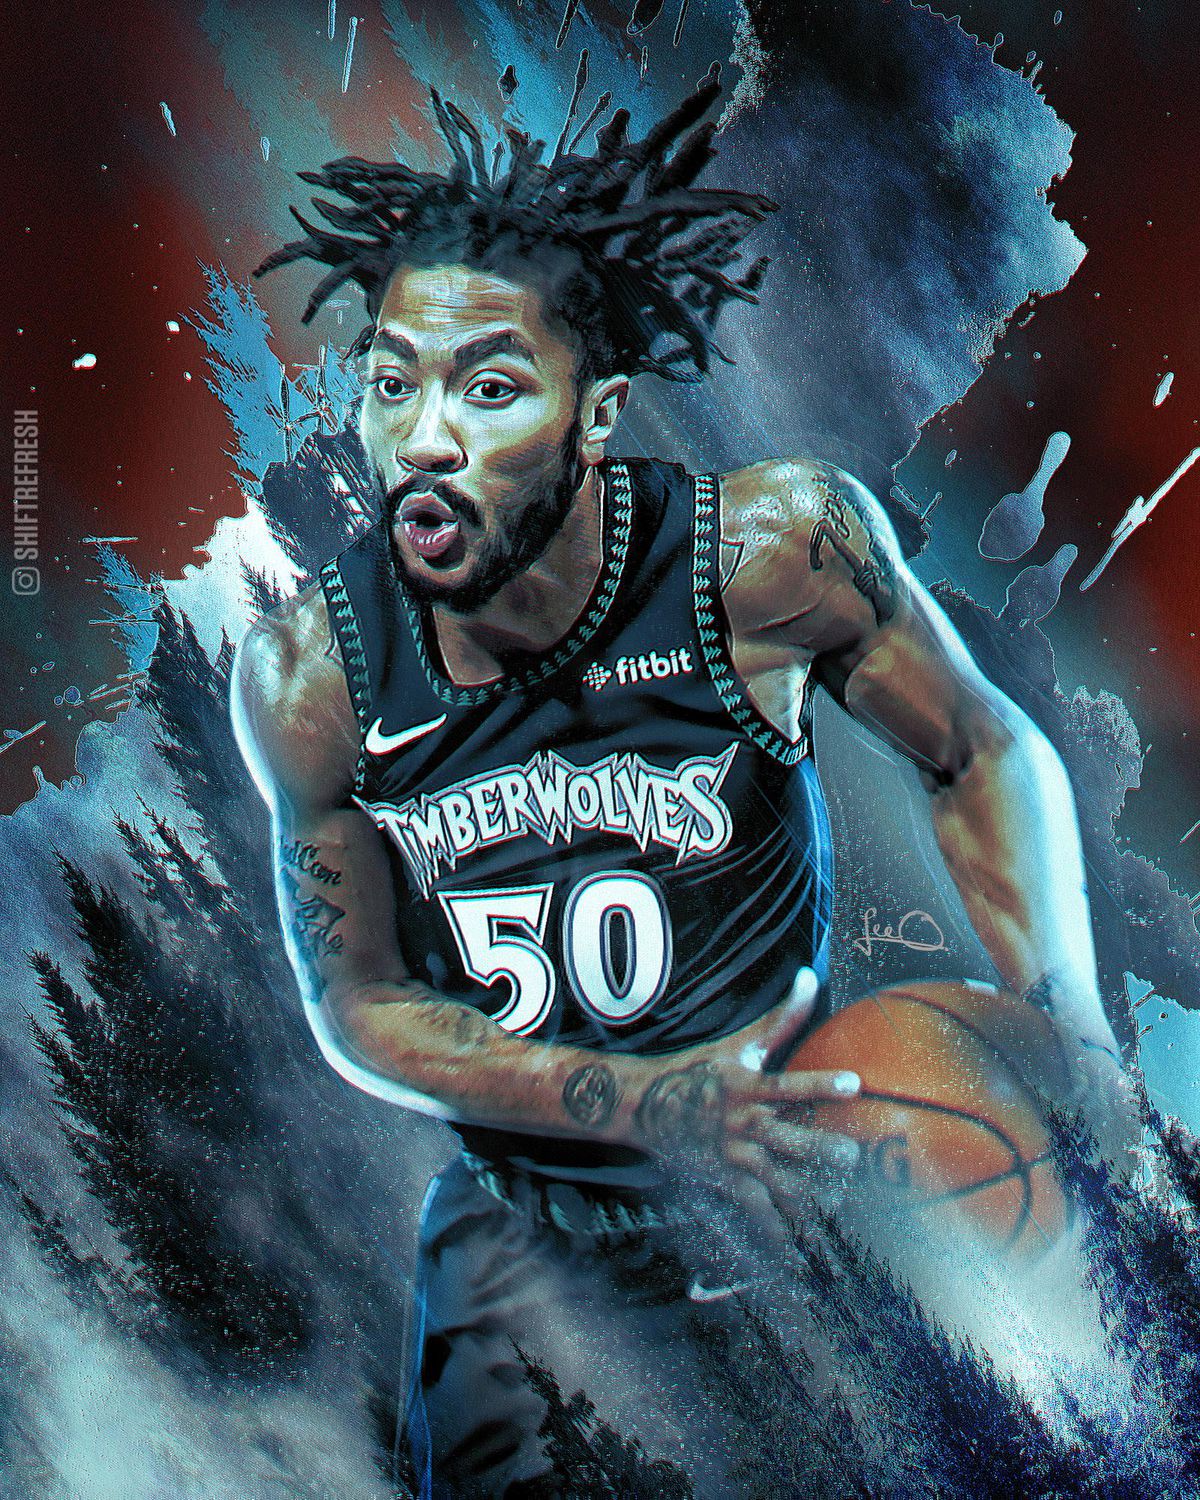 A stylized illustration of Derrick Rose with the number 50 on his jersey